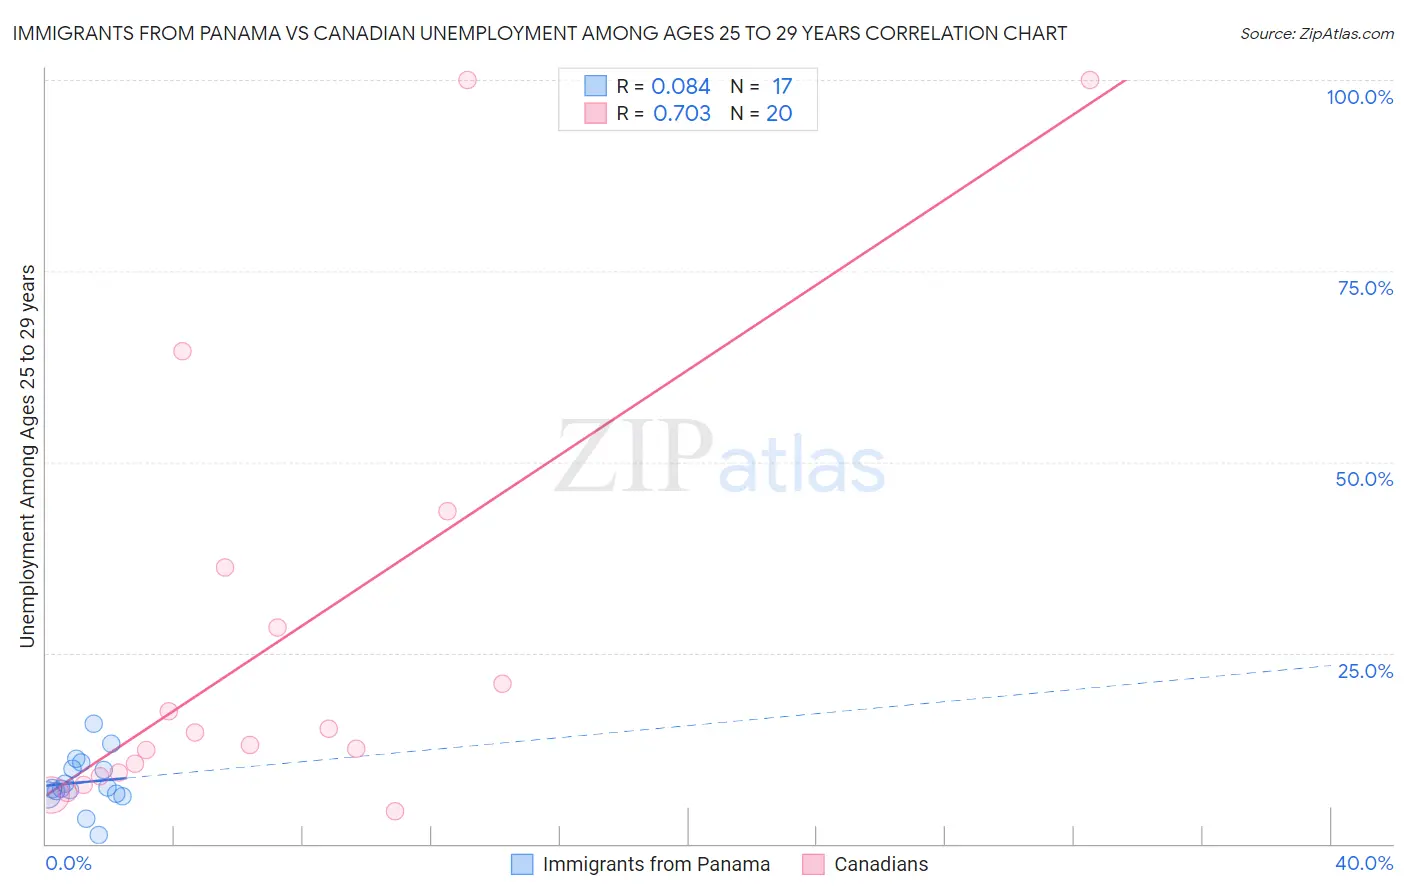 Immigrants from Panama vs Canadian Unemployment Among Ages 25 to 29 years